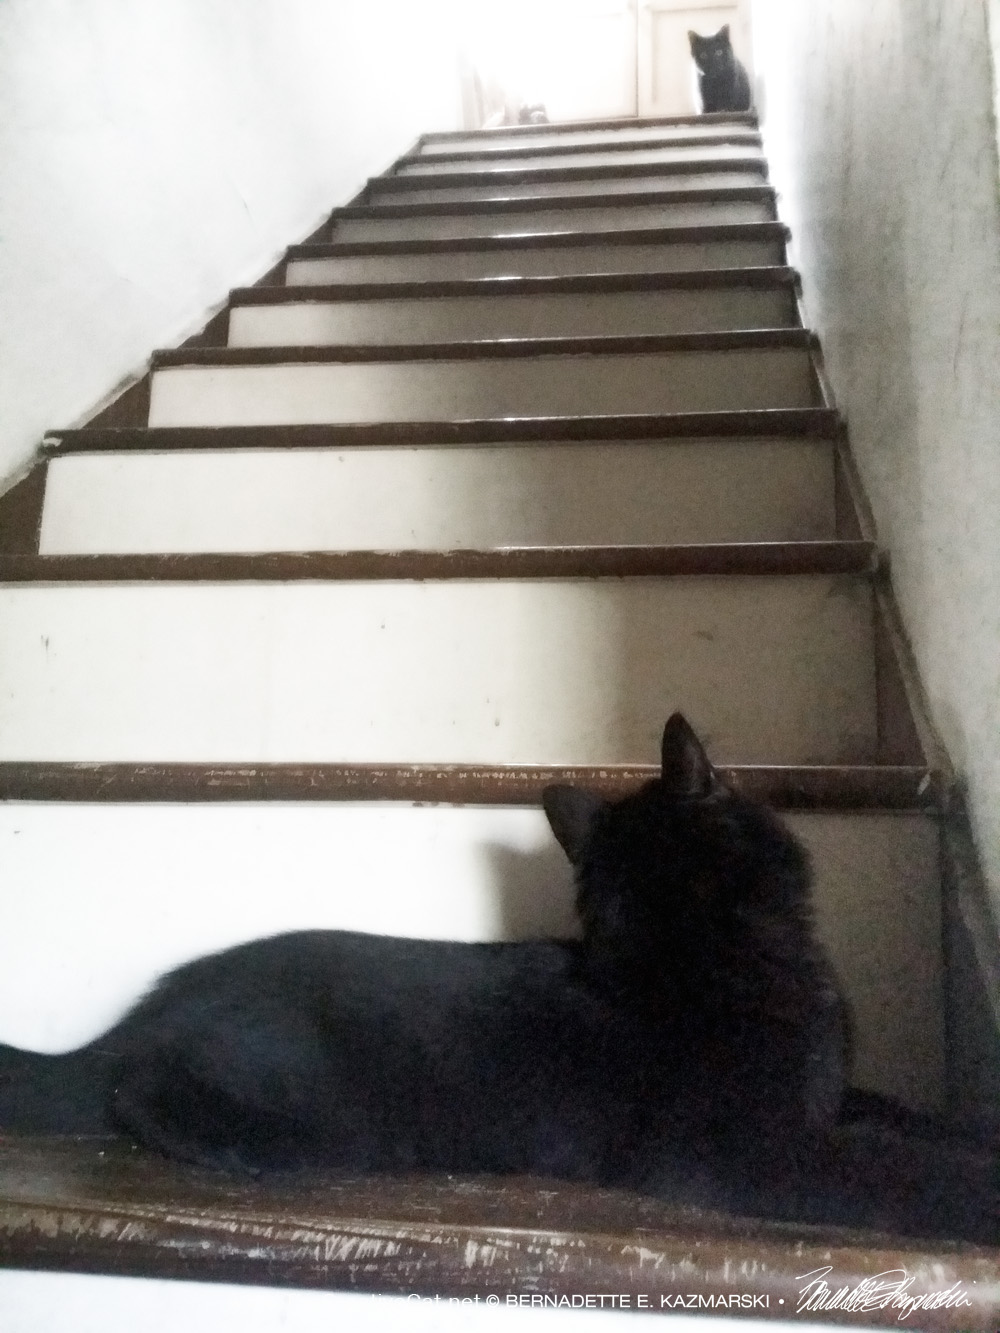 two black cats on stairs